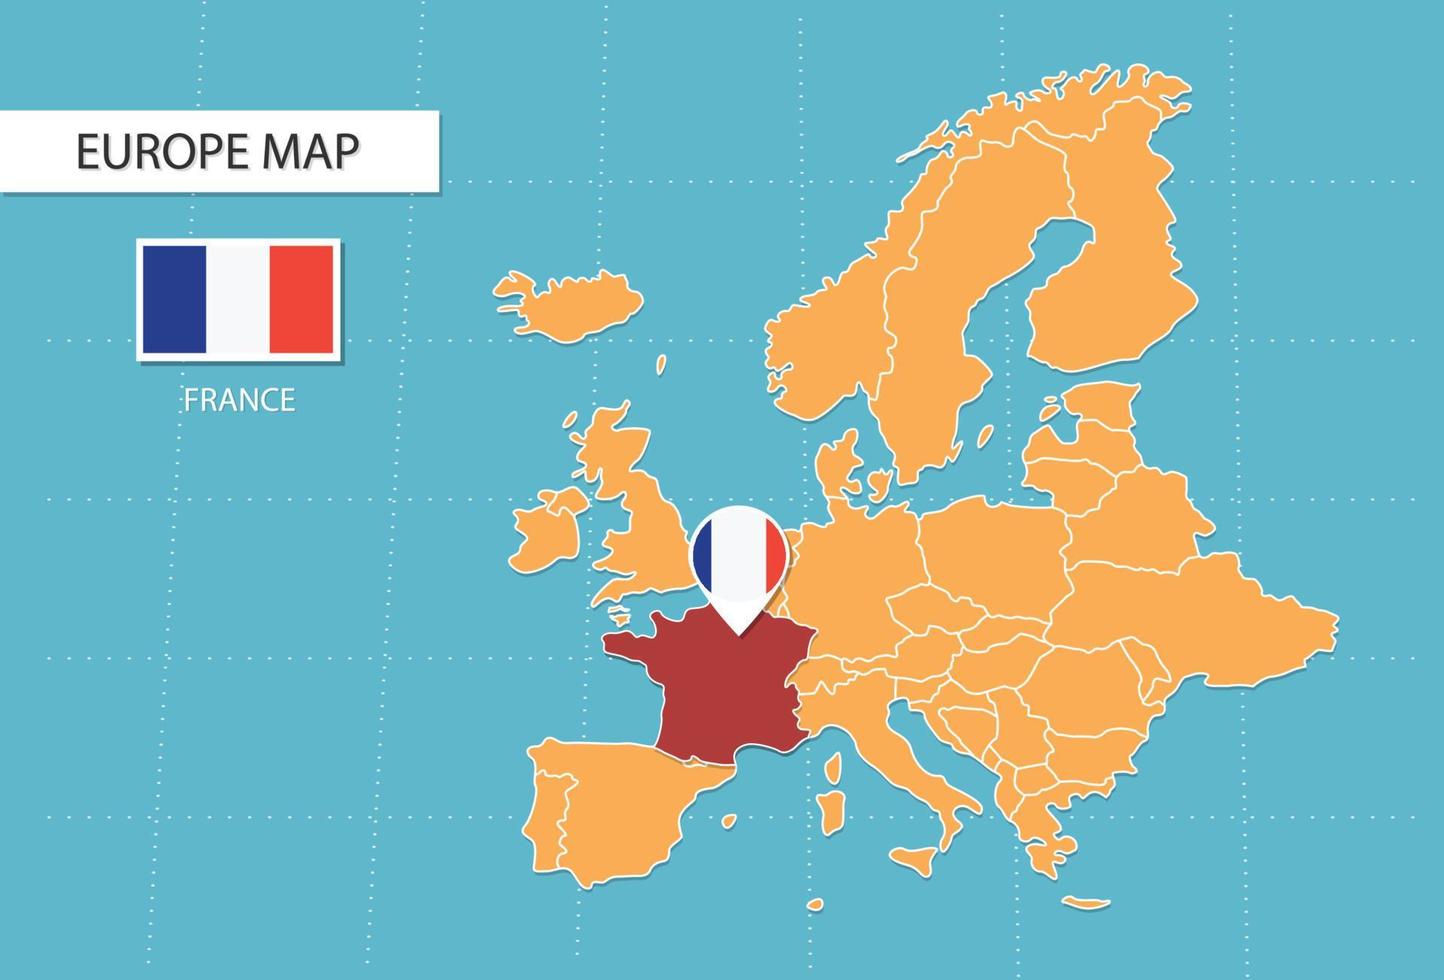 France map in Europe, icons showing France location and flags. vector